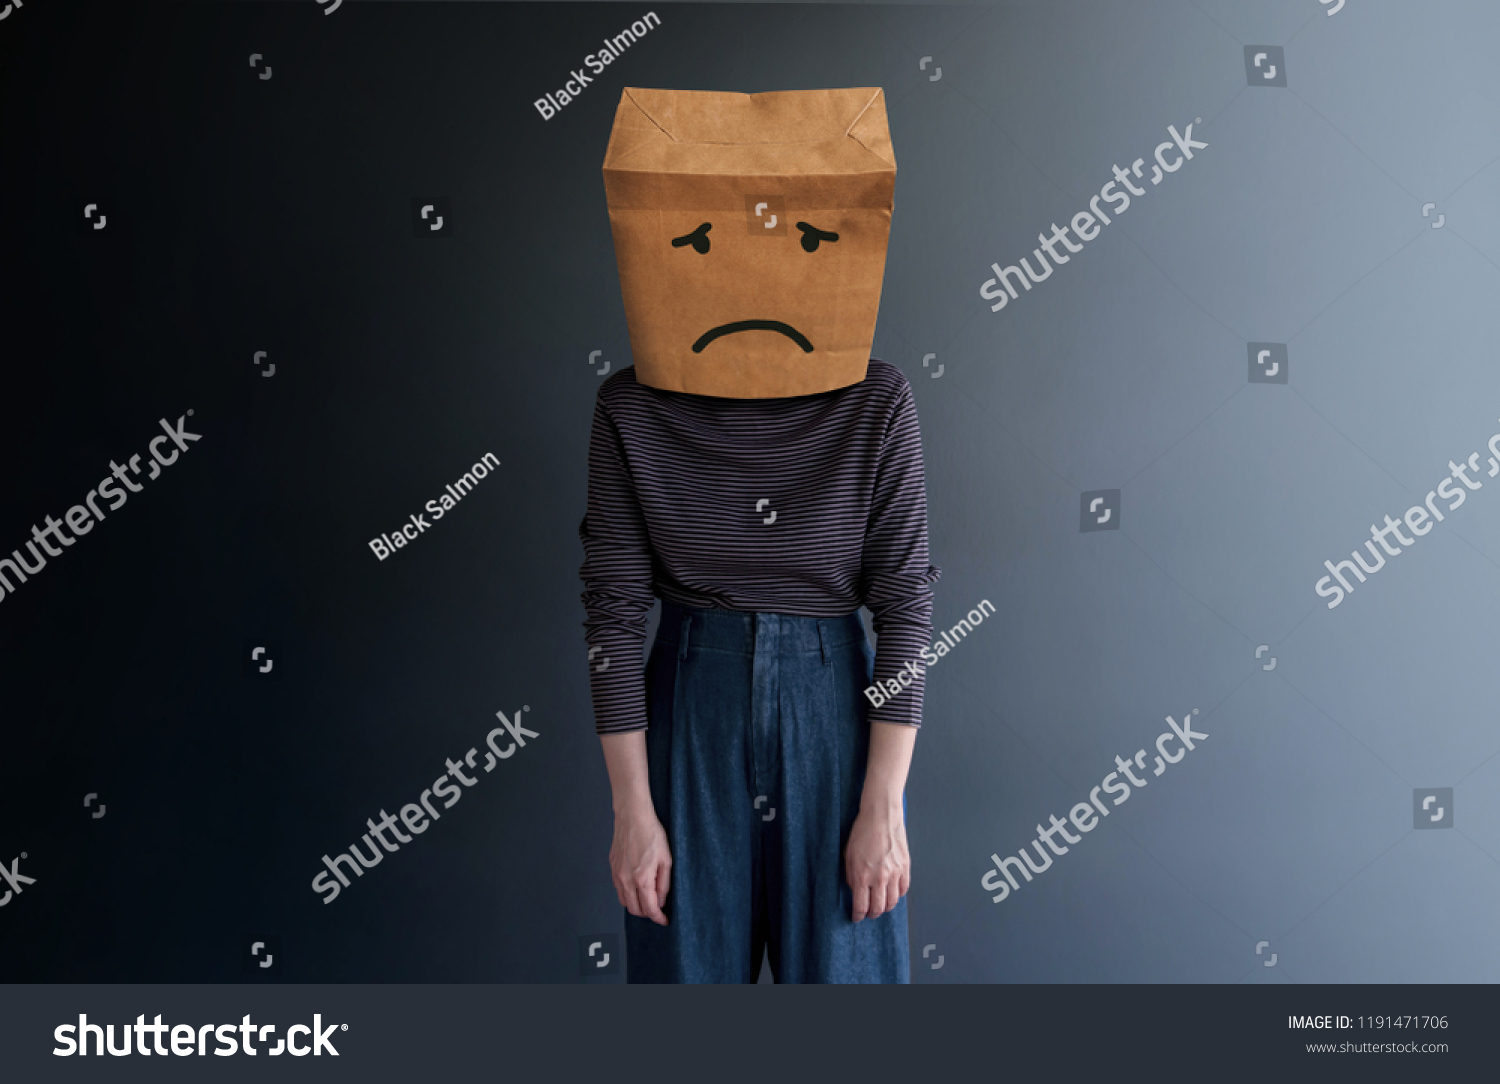 Customer Experience or Human Emotional Concept. Woman Covered her Face by Paper Bag and present Sad Feeling by Drawn Line Cartoon and Body Language #1191471706